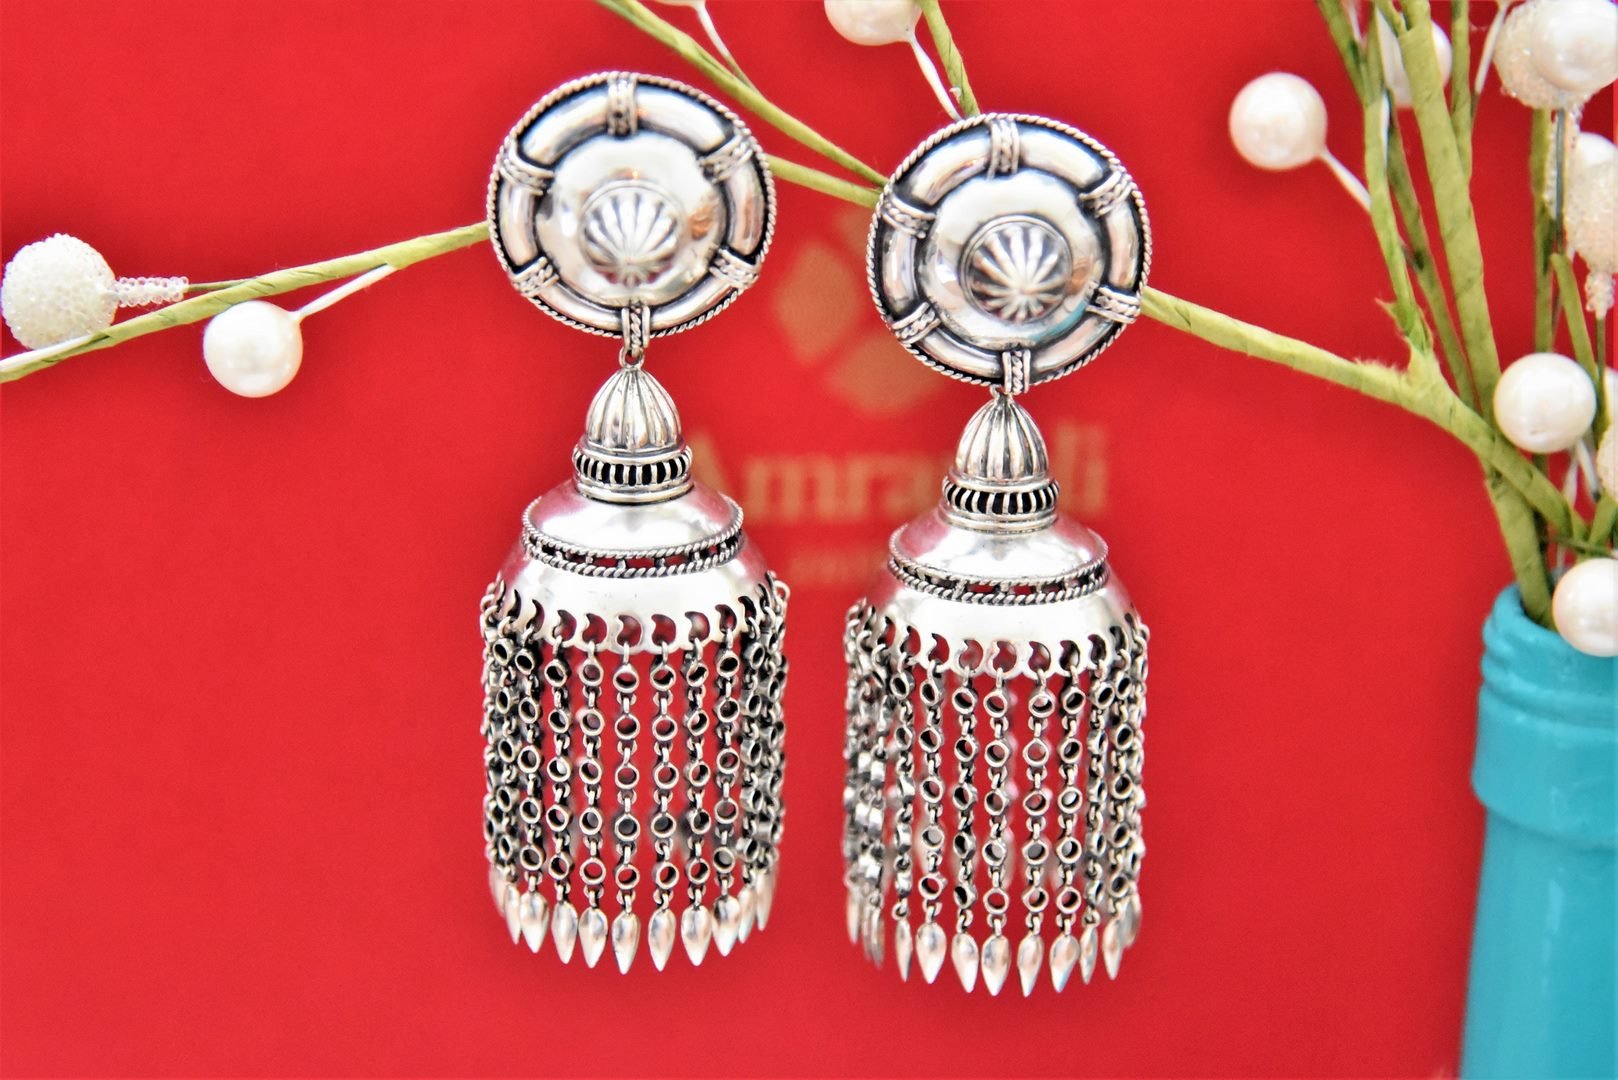 Buy Amrapali silver jhumka earrings online in USA with tassels. Shop beautiful Amrapali jewelry, gold plated necklaces, silver jewelry, wedding jewelry, gold plated earrings from Pure Elegance Indian fashion store in USA.-front